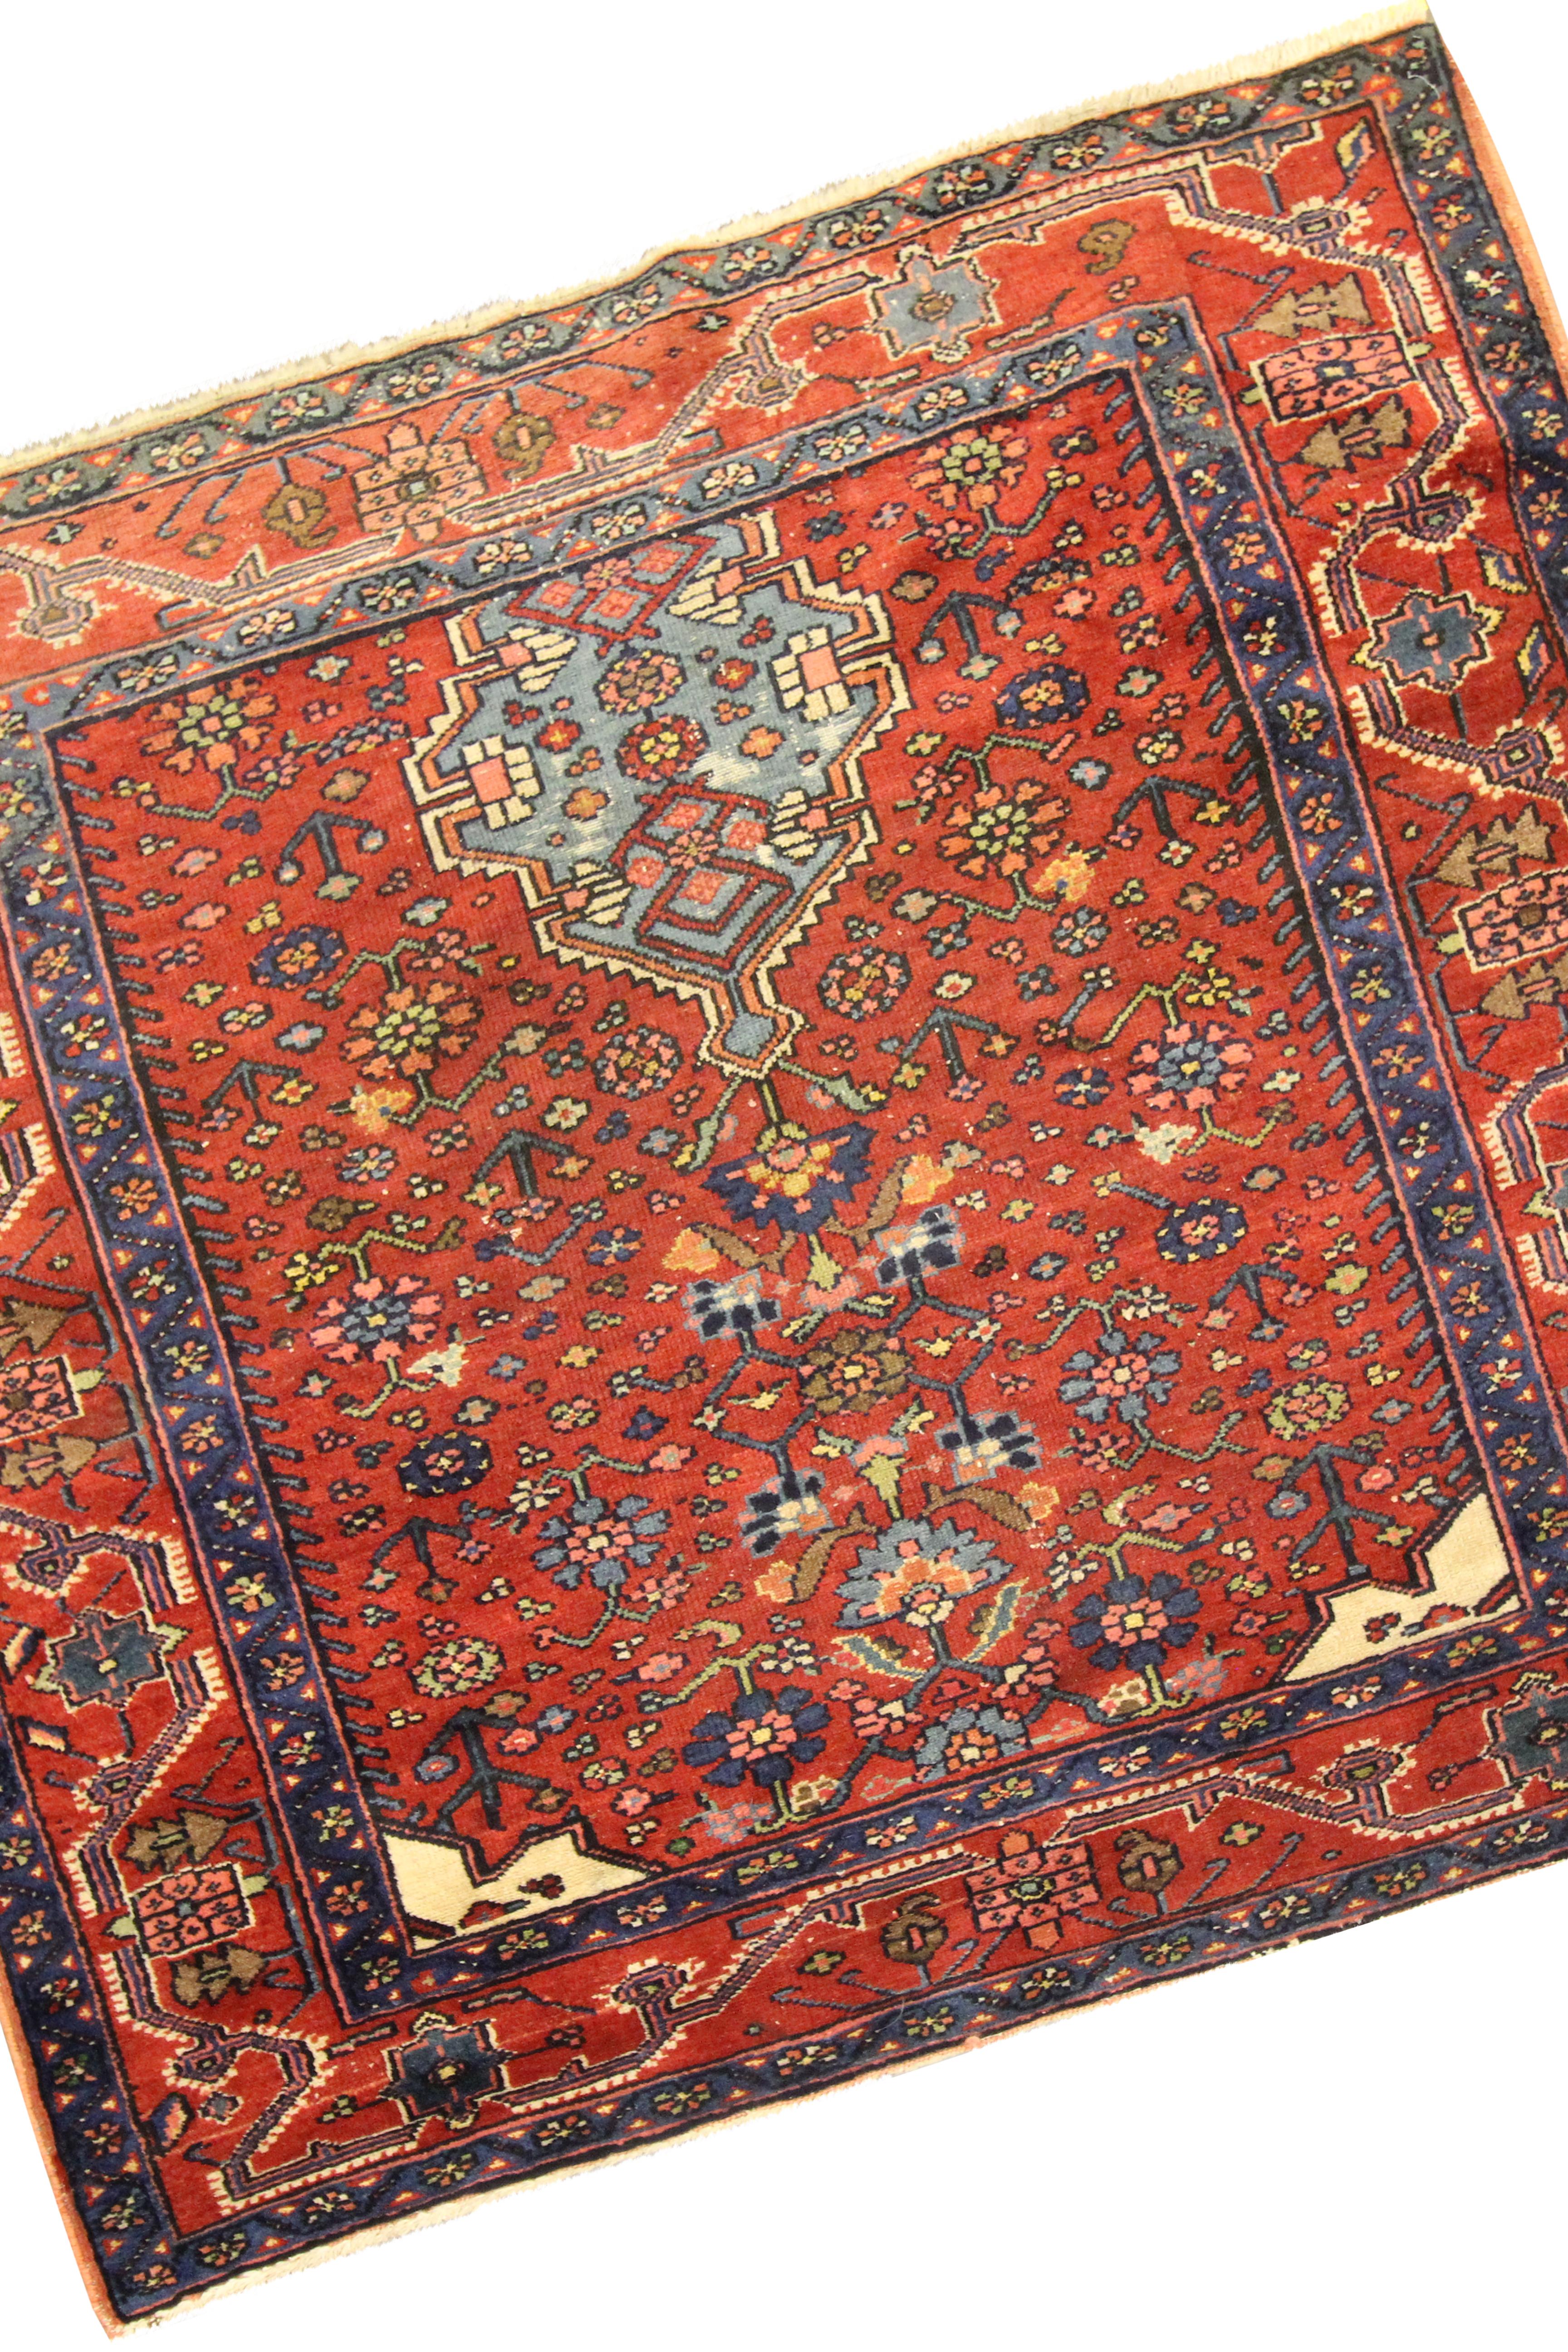 Azerbaijani Traditional Oriental Rug Rust Antique Rug Handwoven Wool Carpet For Sale